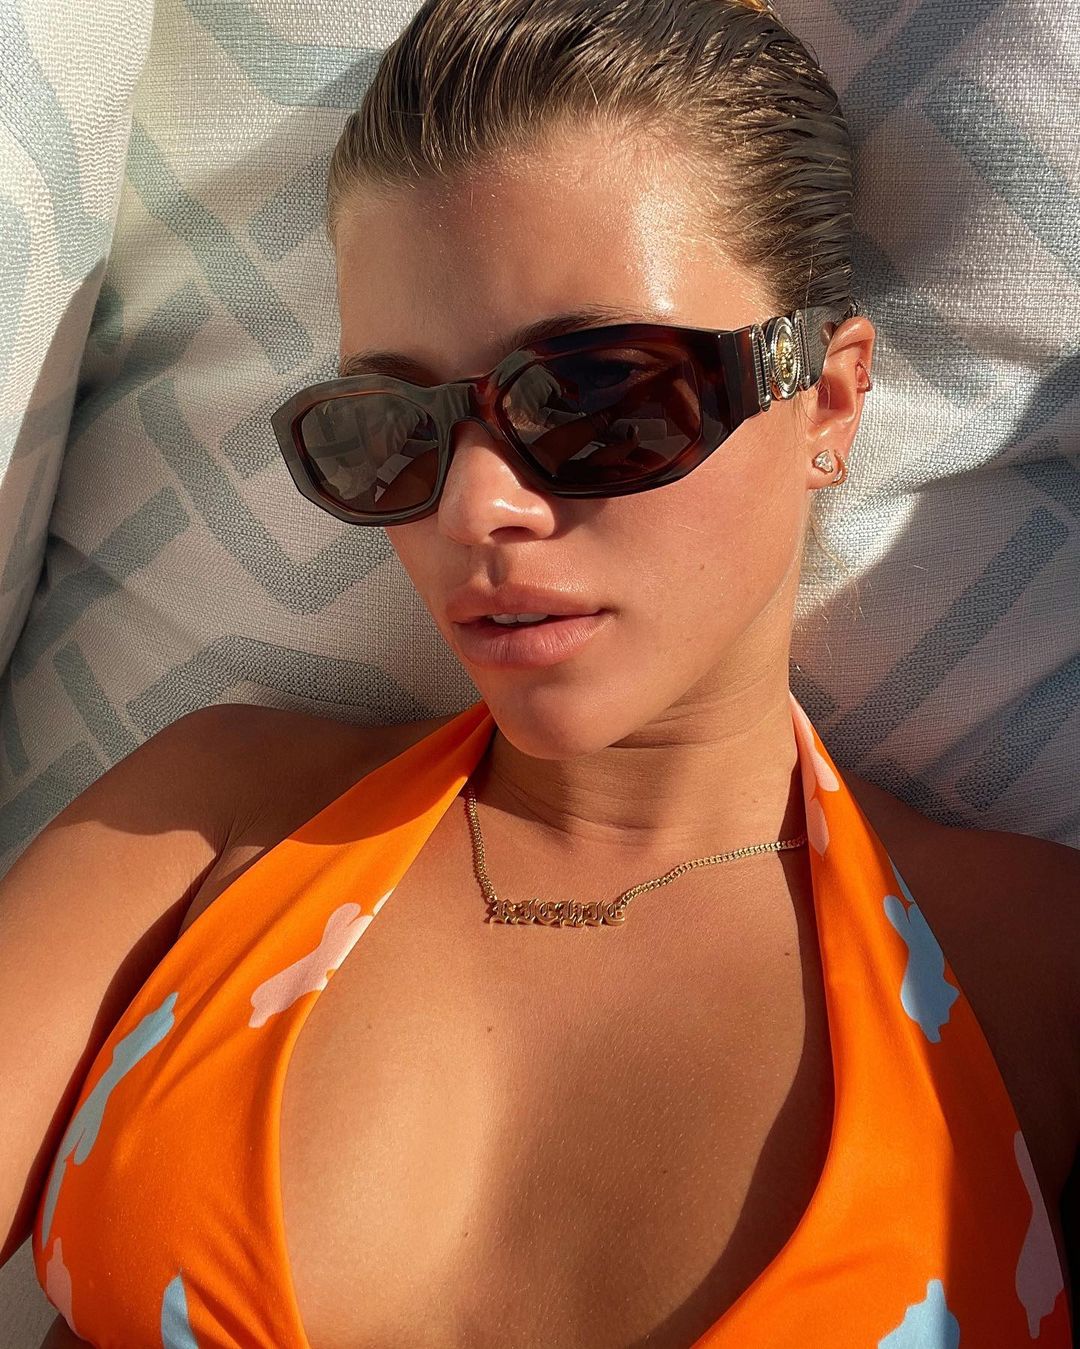 Sofia Richie and Her Mom Lay Out Before Her Big Day! - Photo 23